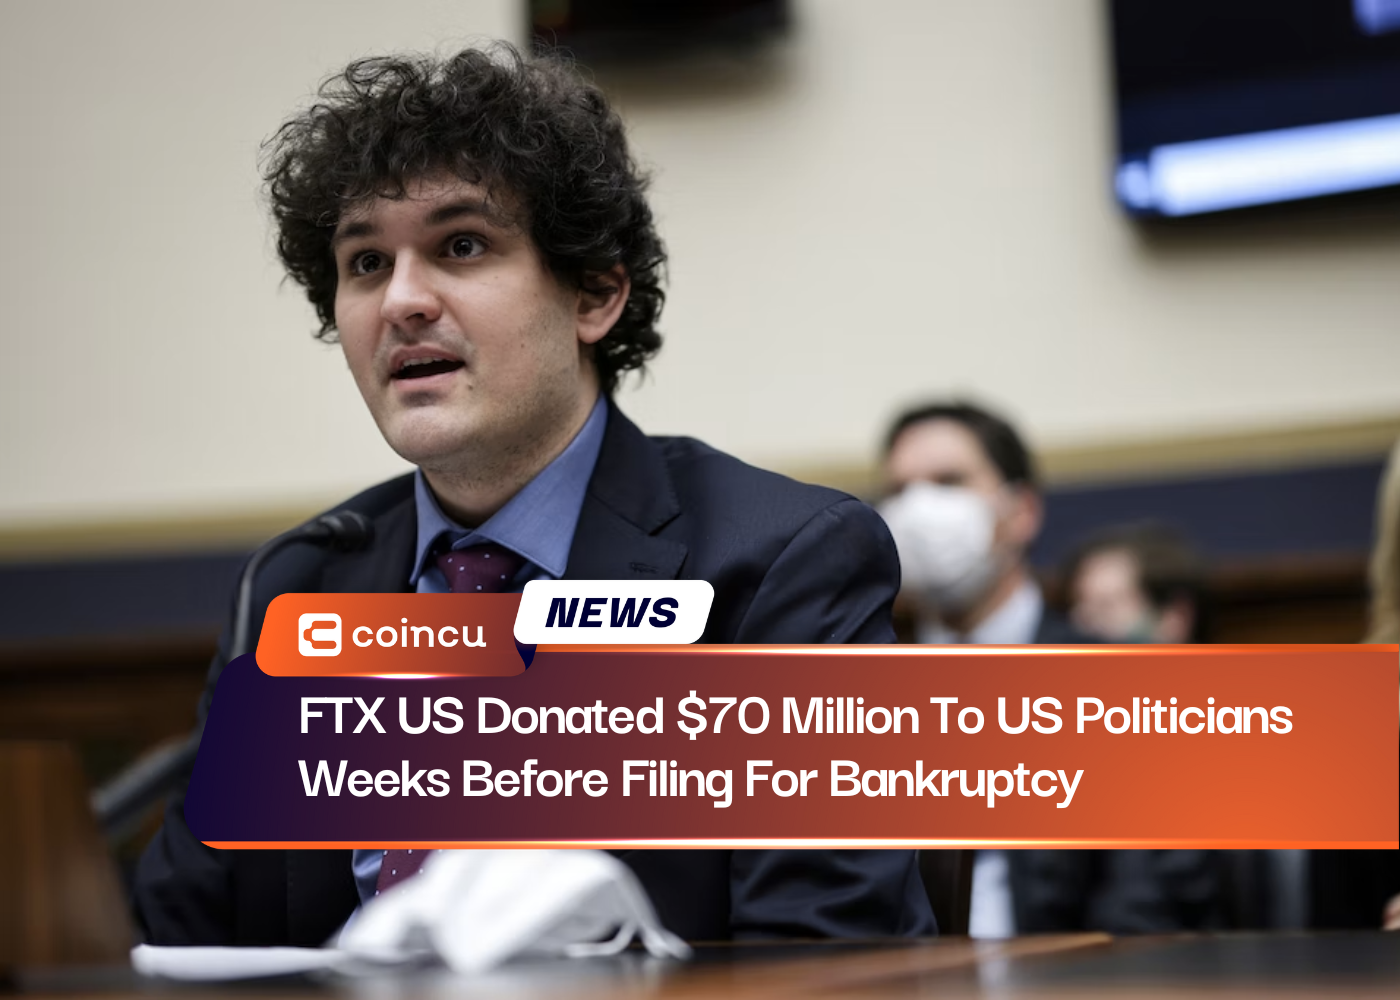 FTX US Donated $70 Million To US Politicians Weeks Before Filing For Bankruptcy